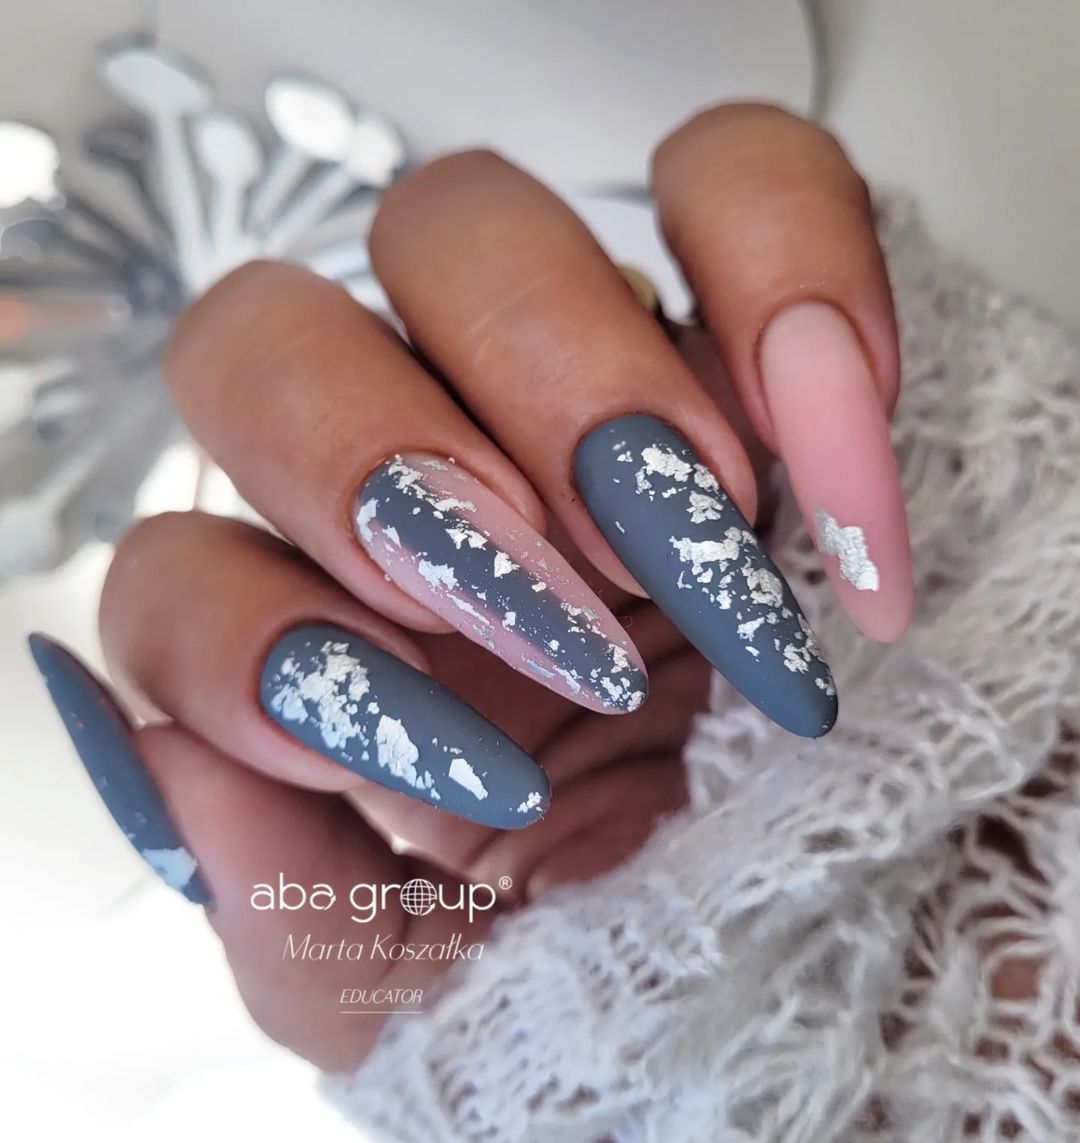 Long Matte Gray and Nude Nails with Silver Foil